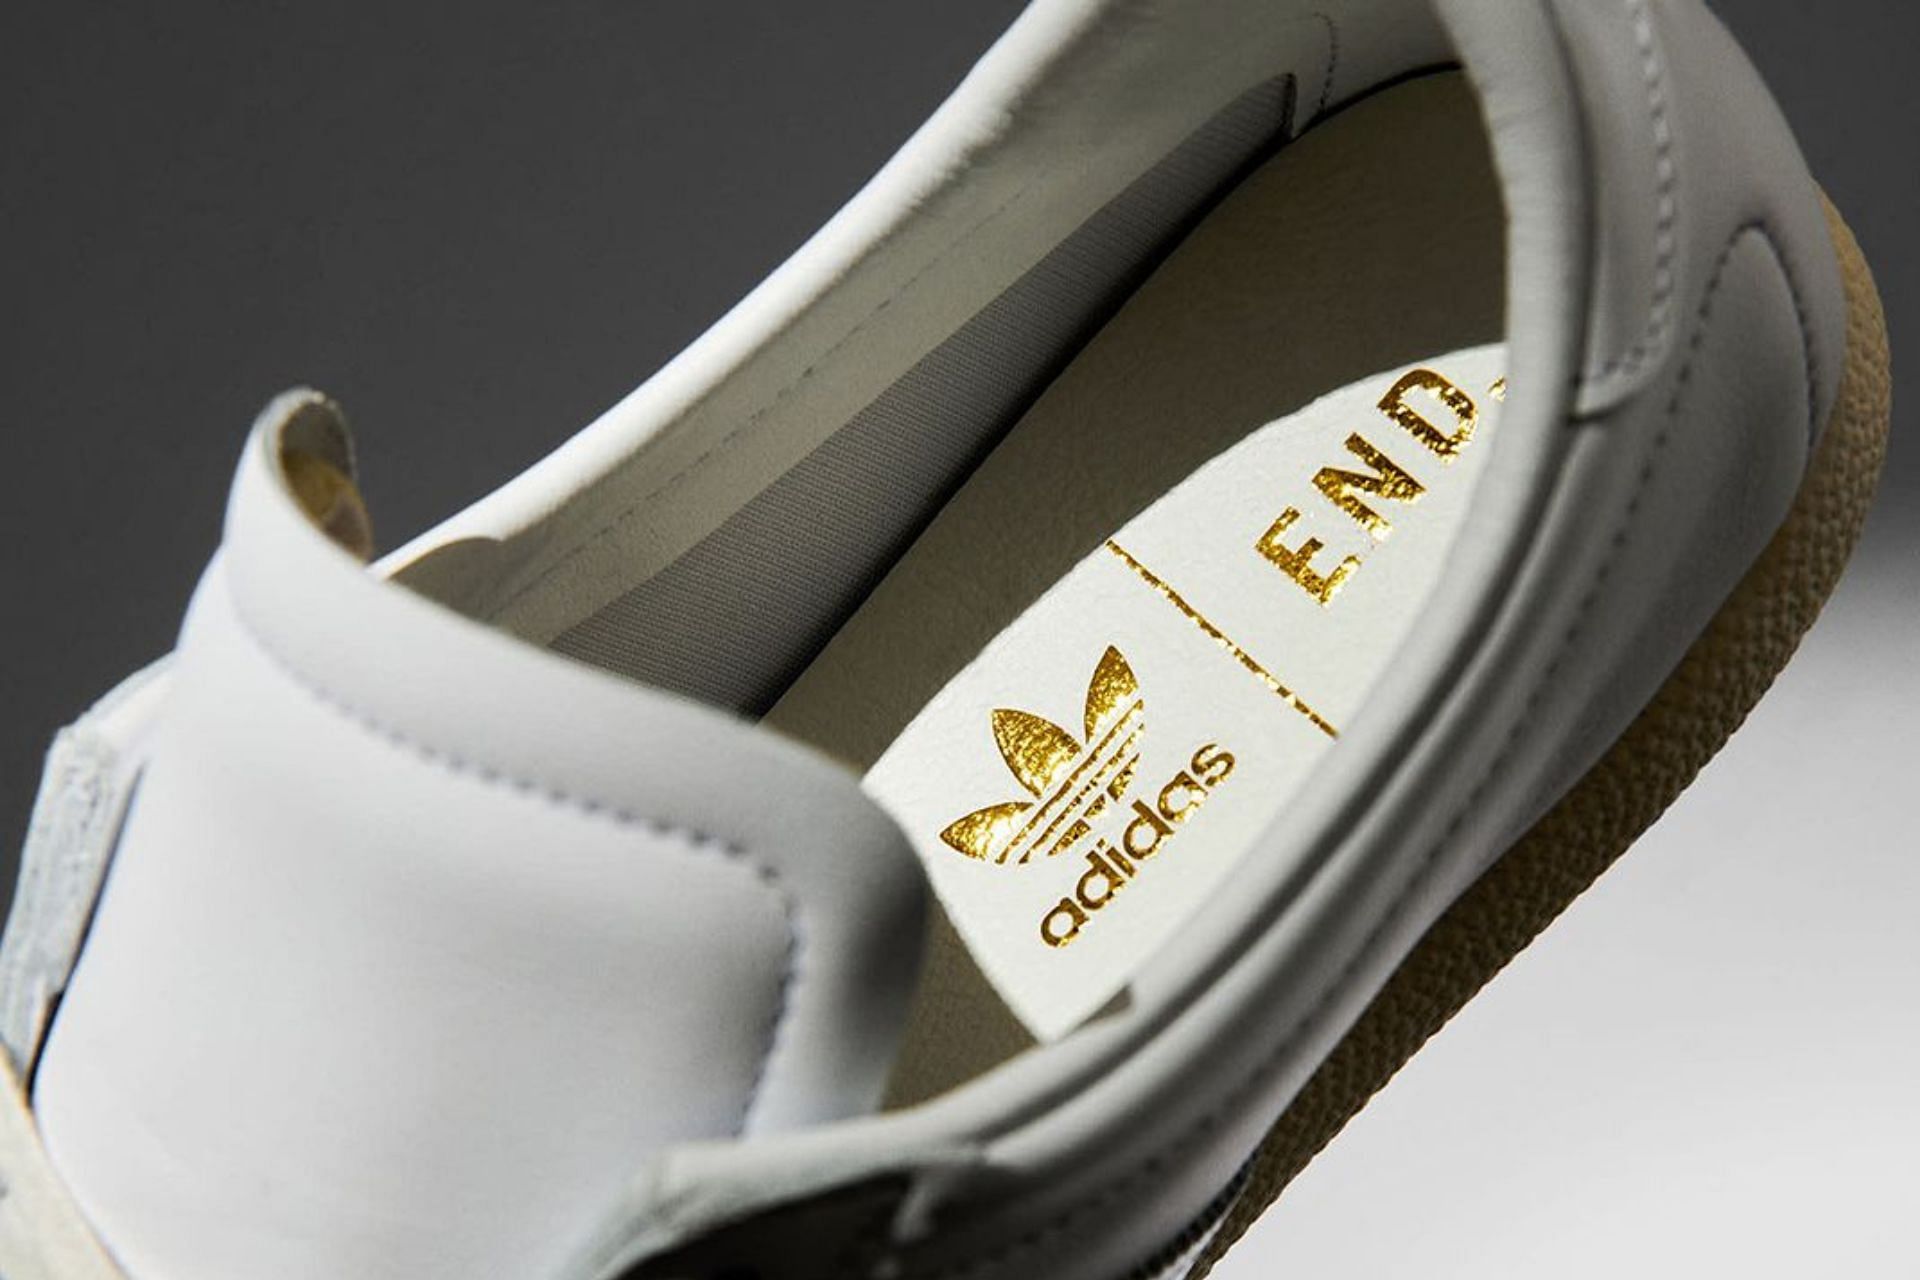 Take a closer look at the upcoming MIG Berlin White shoes (image via END. Clothing)